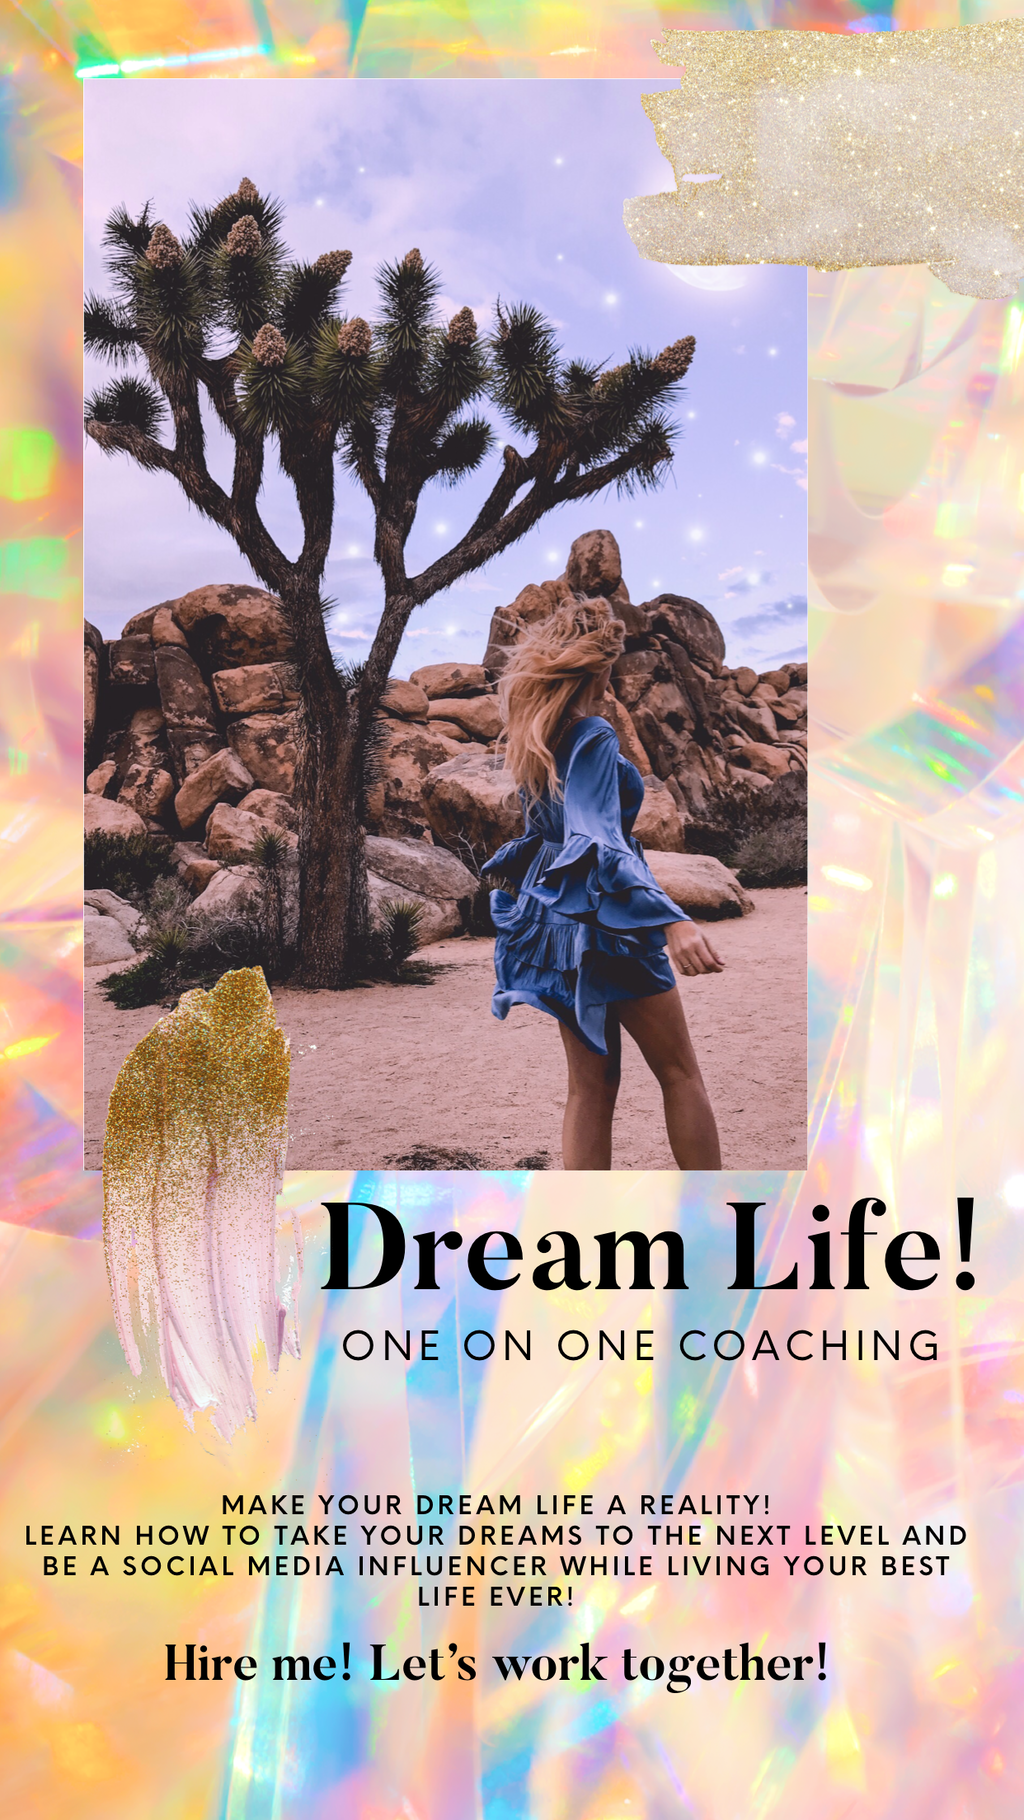 Dream Life - Coaching One On One - Vanilla Sky Dreaming